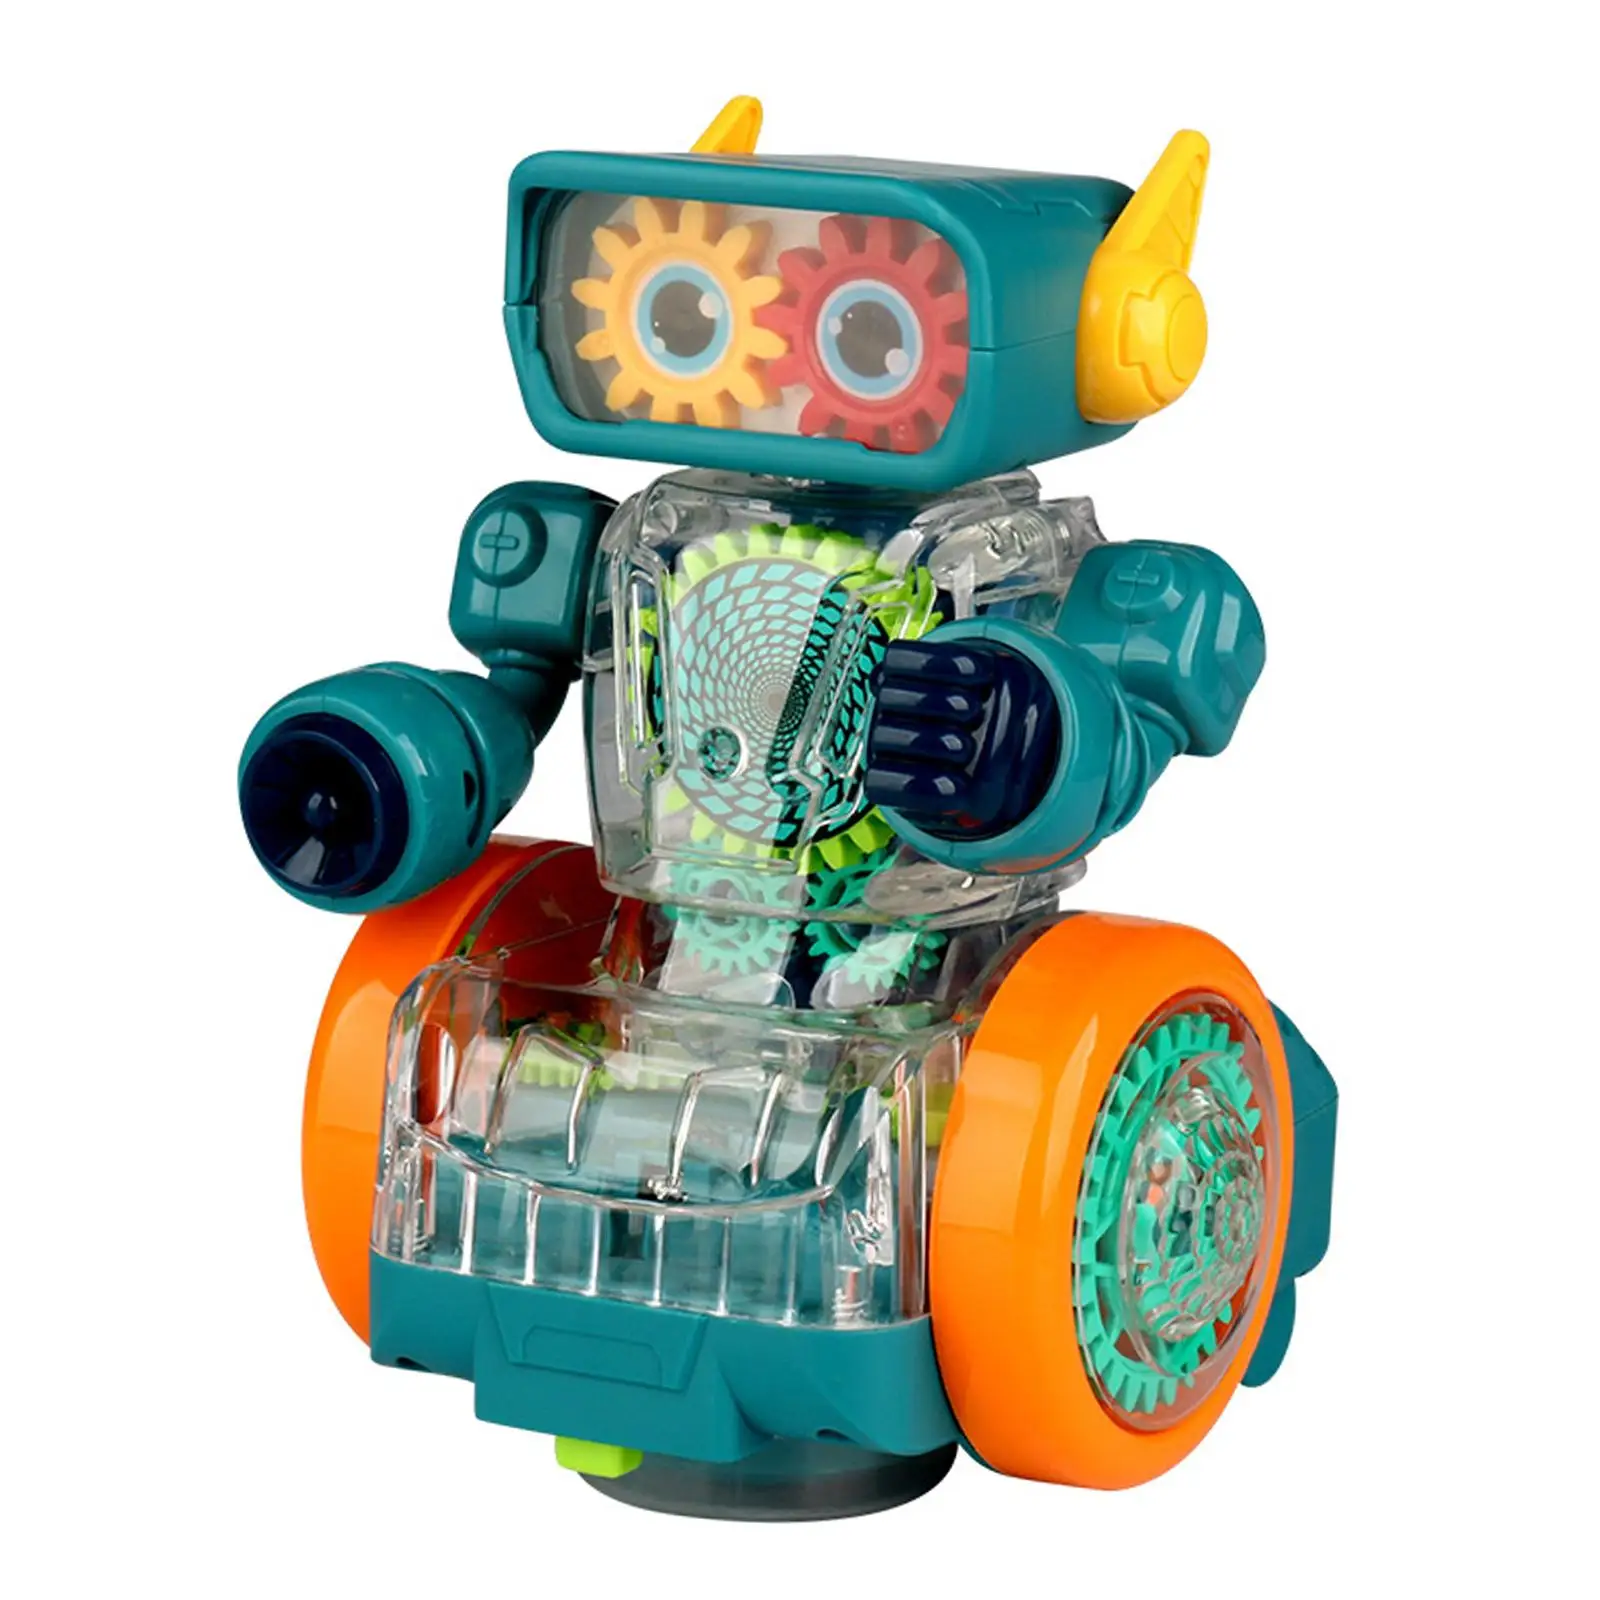 Electric Mechanical Gear Robot Toy with Lighting Fine Motor Skills Gear Toy for Children Girls Toddlers Kids Boys